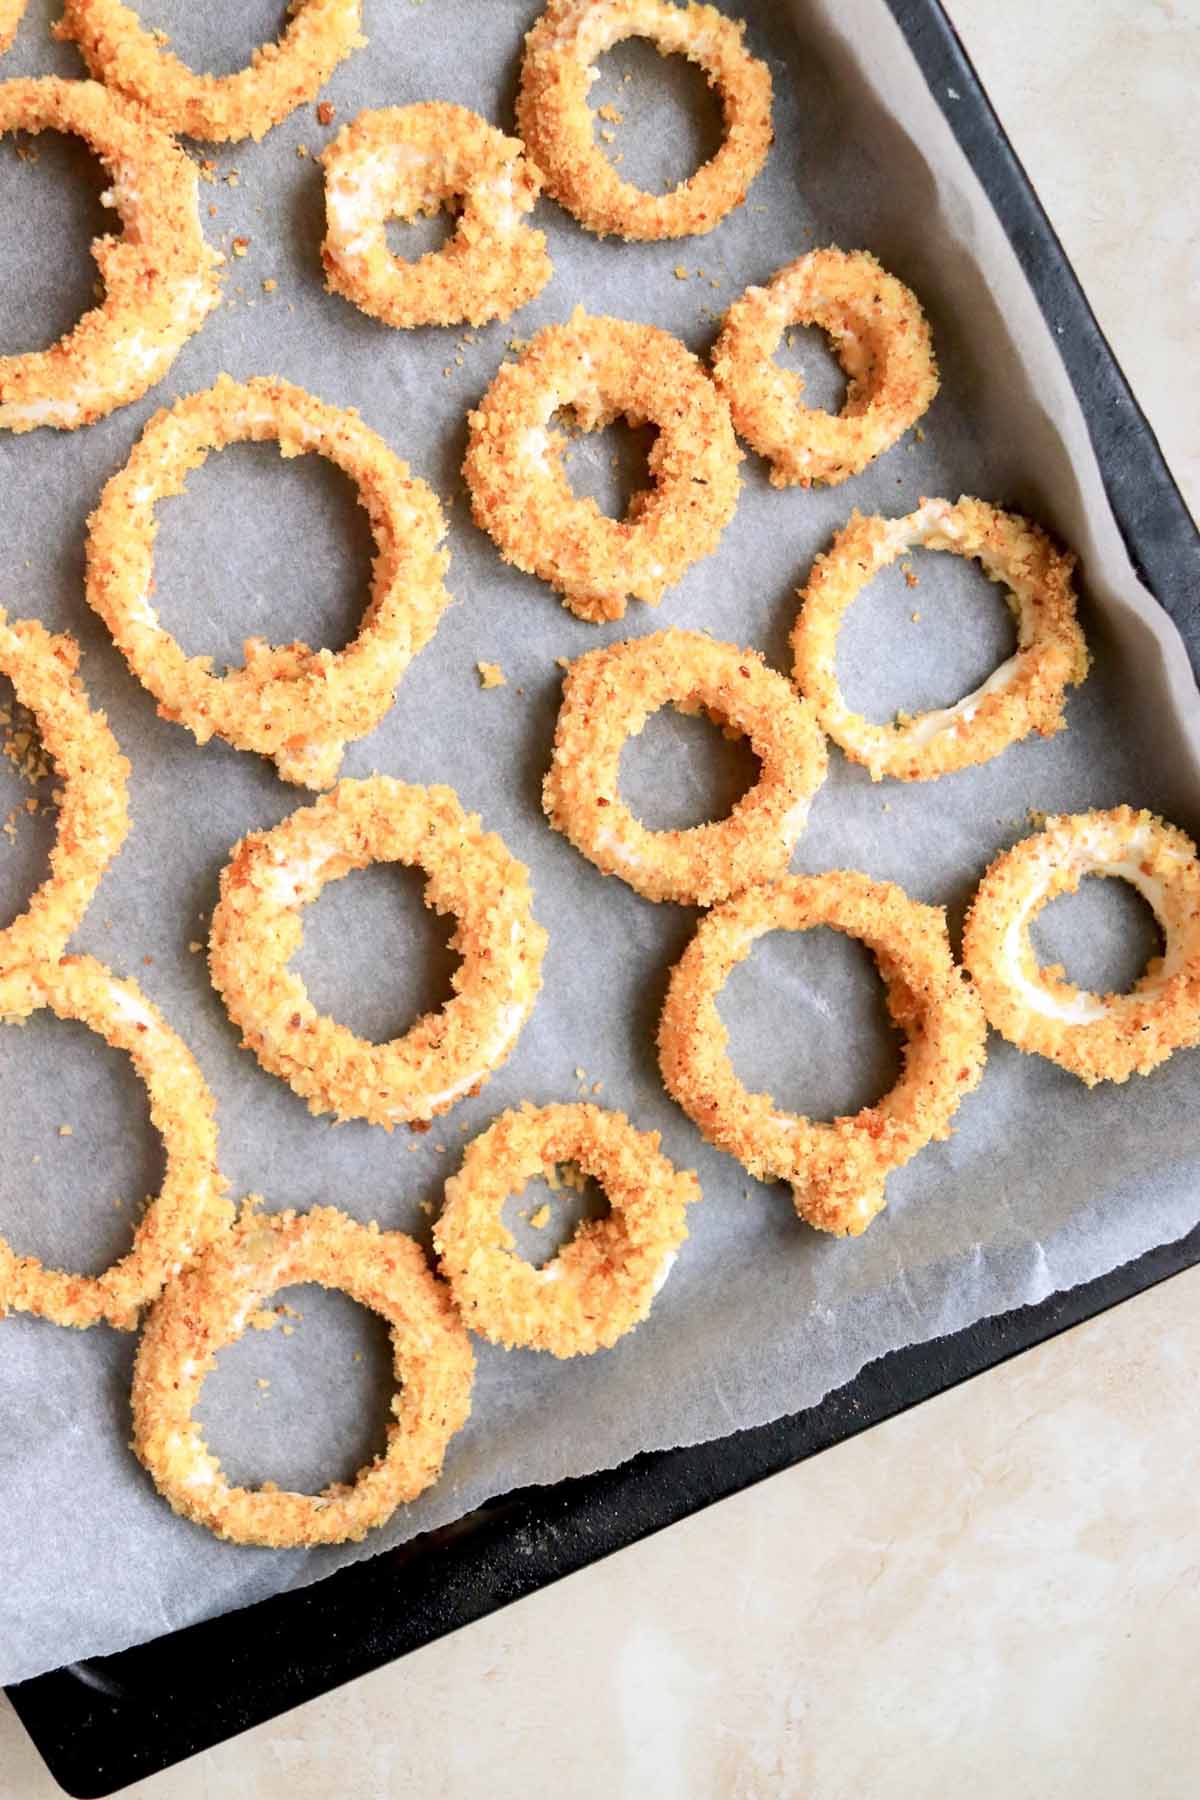 Unbaked onion rings on a parchment lined baking sheet.